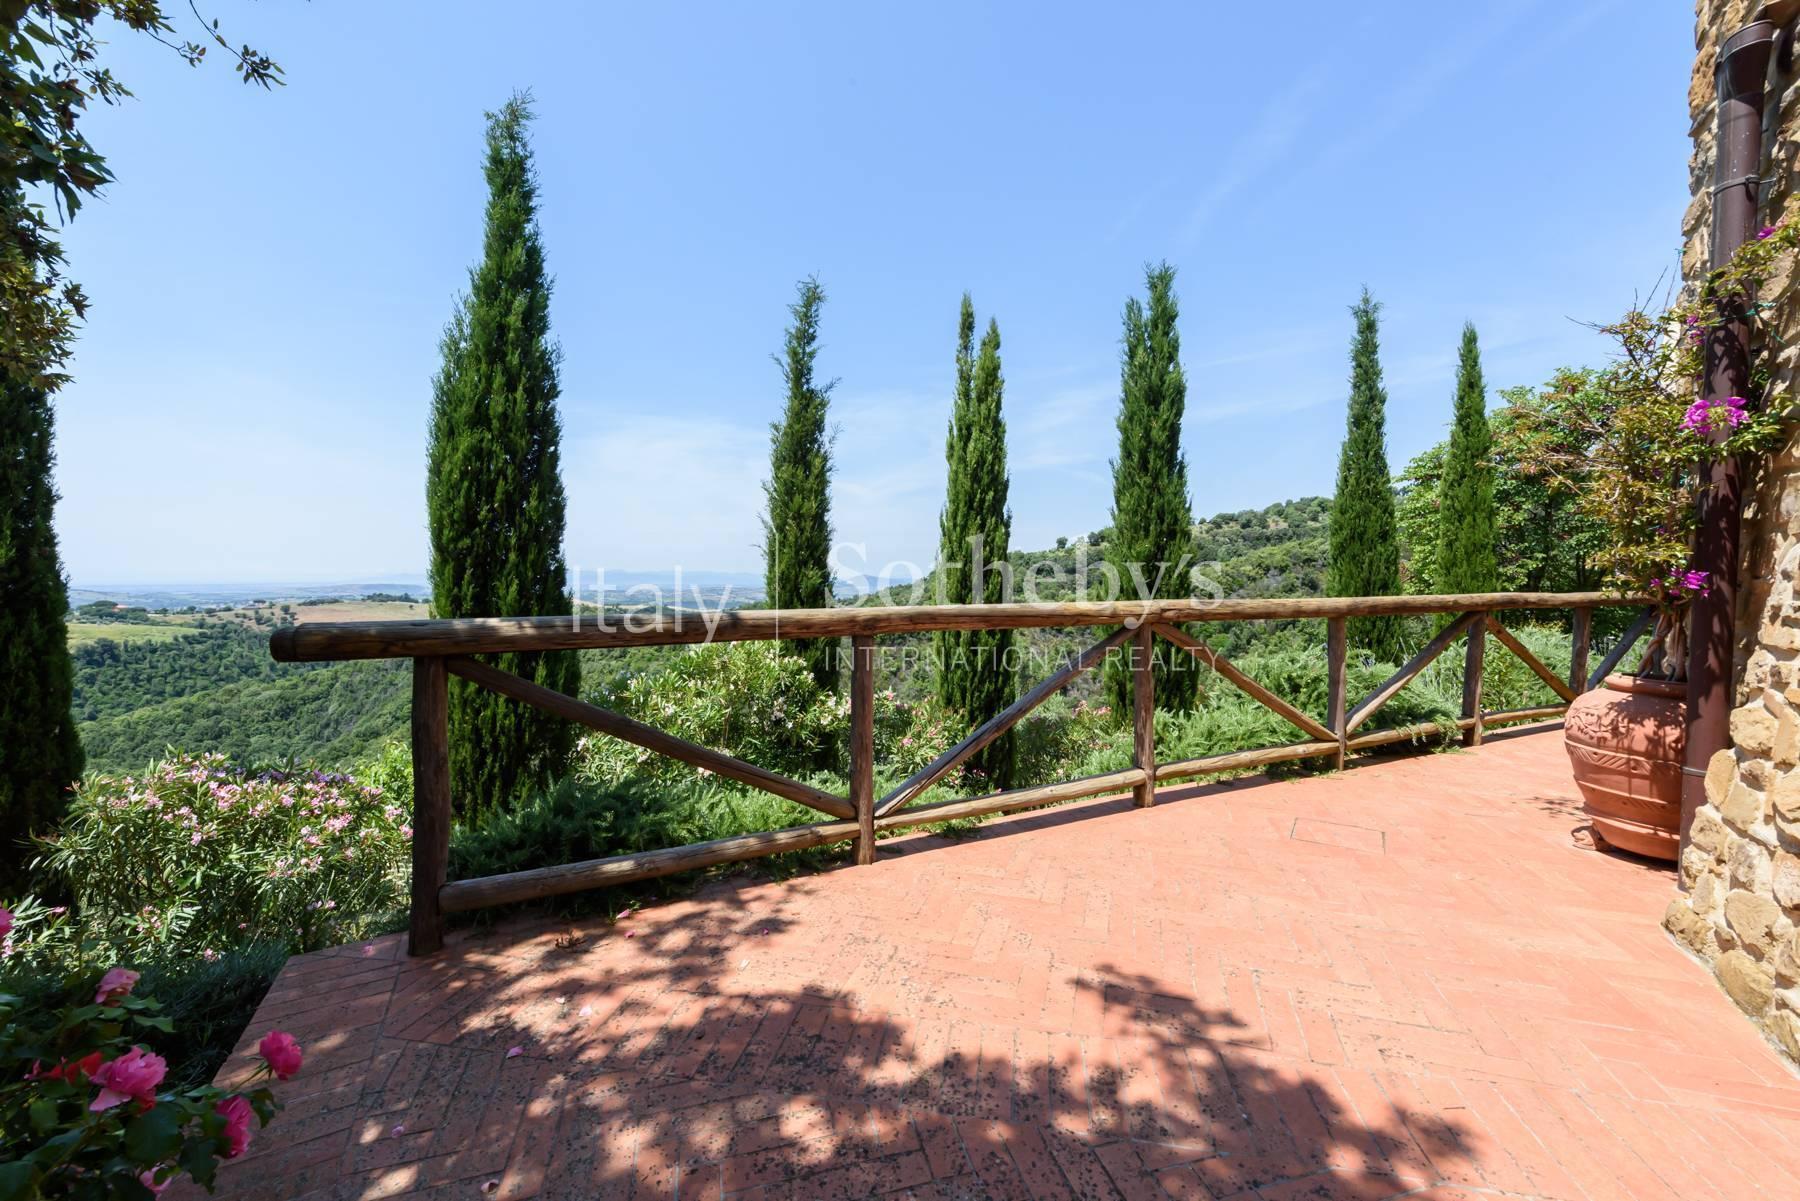 Enchanting property in maremma with vineyards and sea view - 3